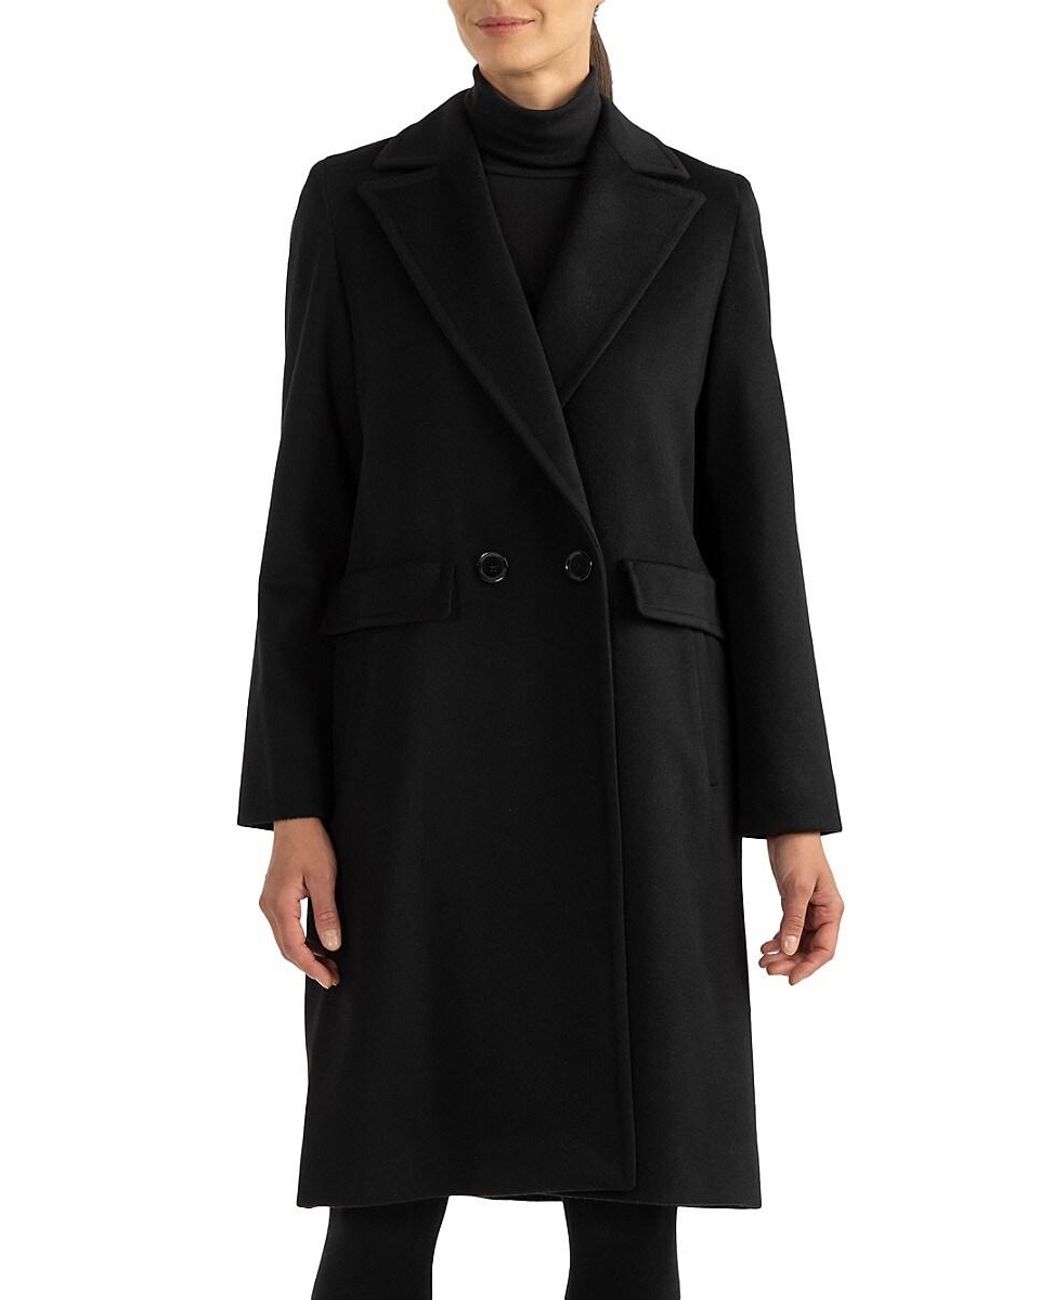 Sofia Cashmere Double Breasted Wool & Cashmere Coat in Black | Lyst Canada